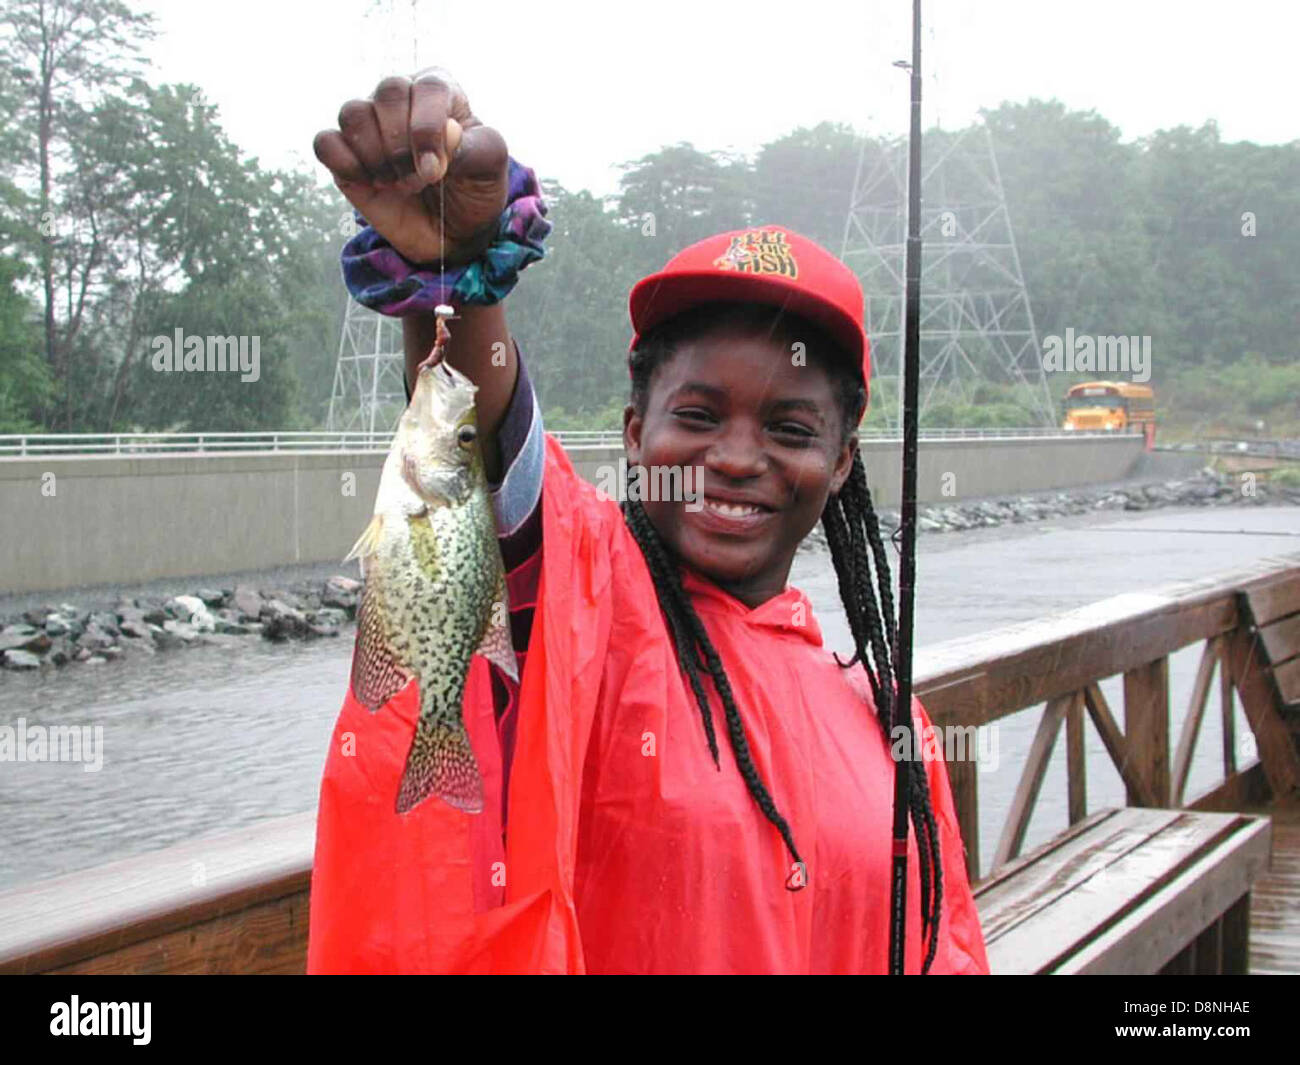 https://c8.alamy.com/comp/D8NHAE/young-african-american-teenage-girl-smile-and-enjoy-fishing-on-a-rainy-D8NHAE.jpg